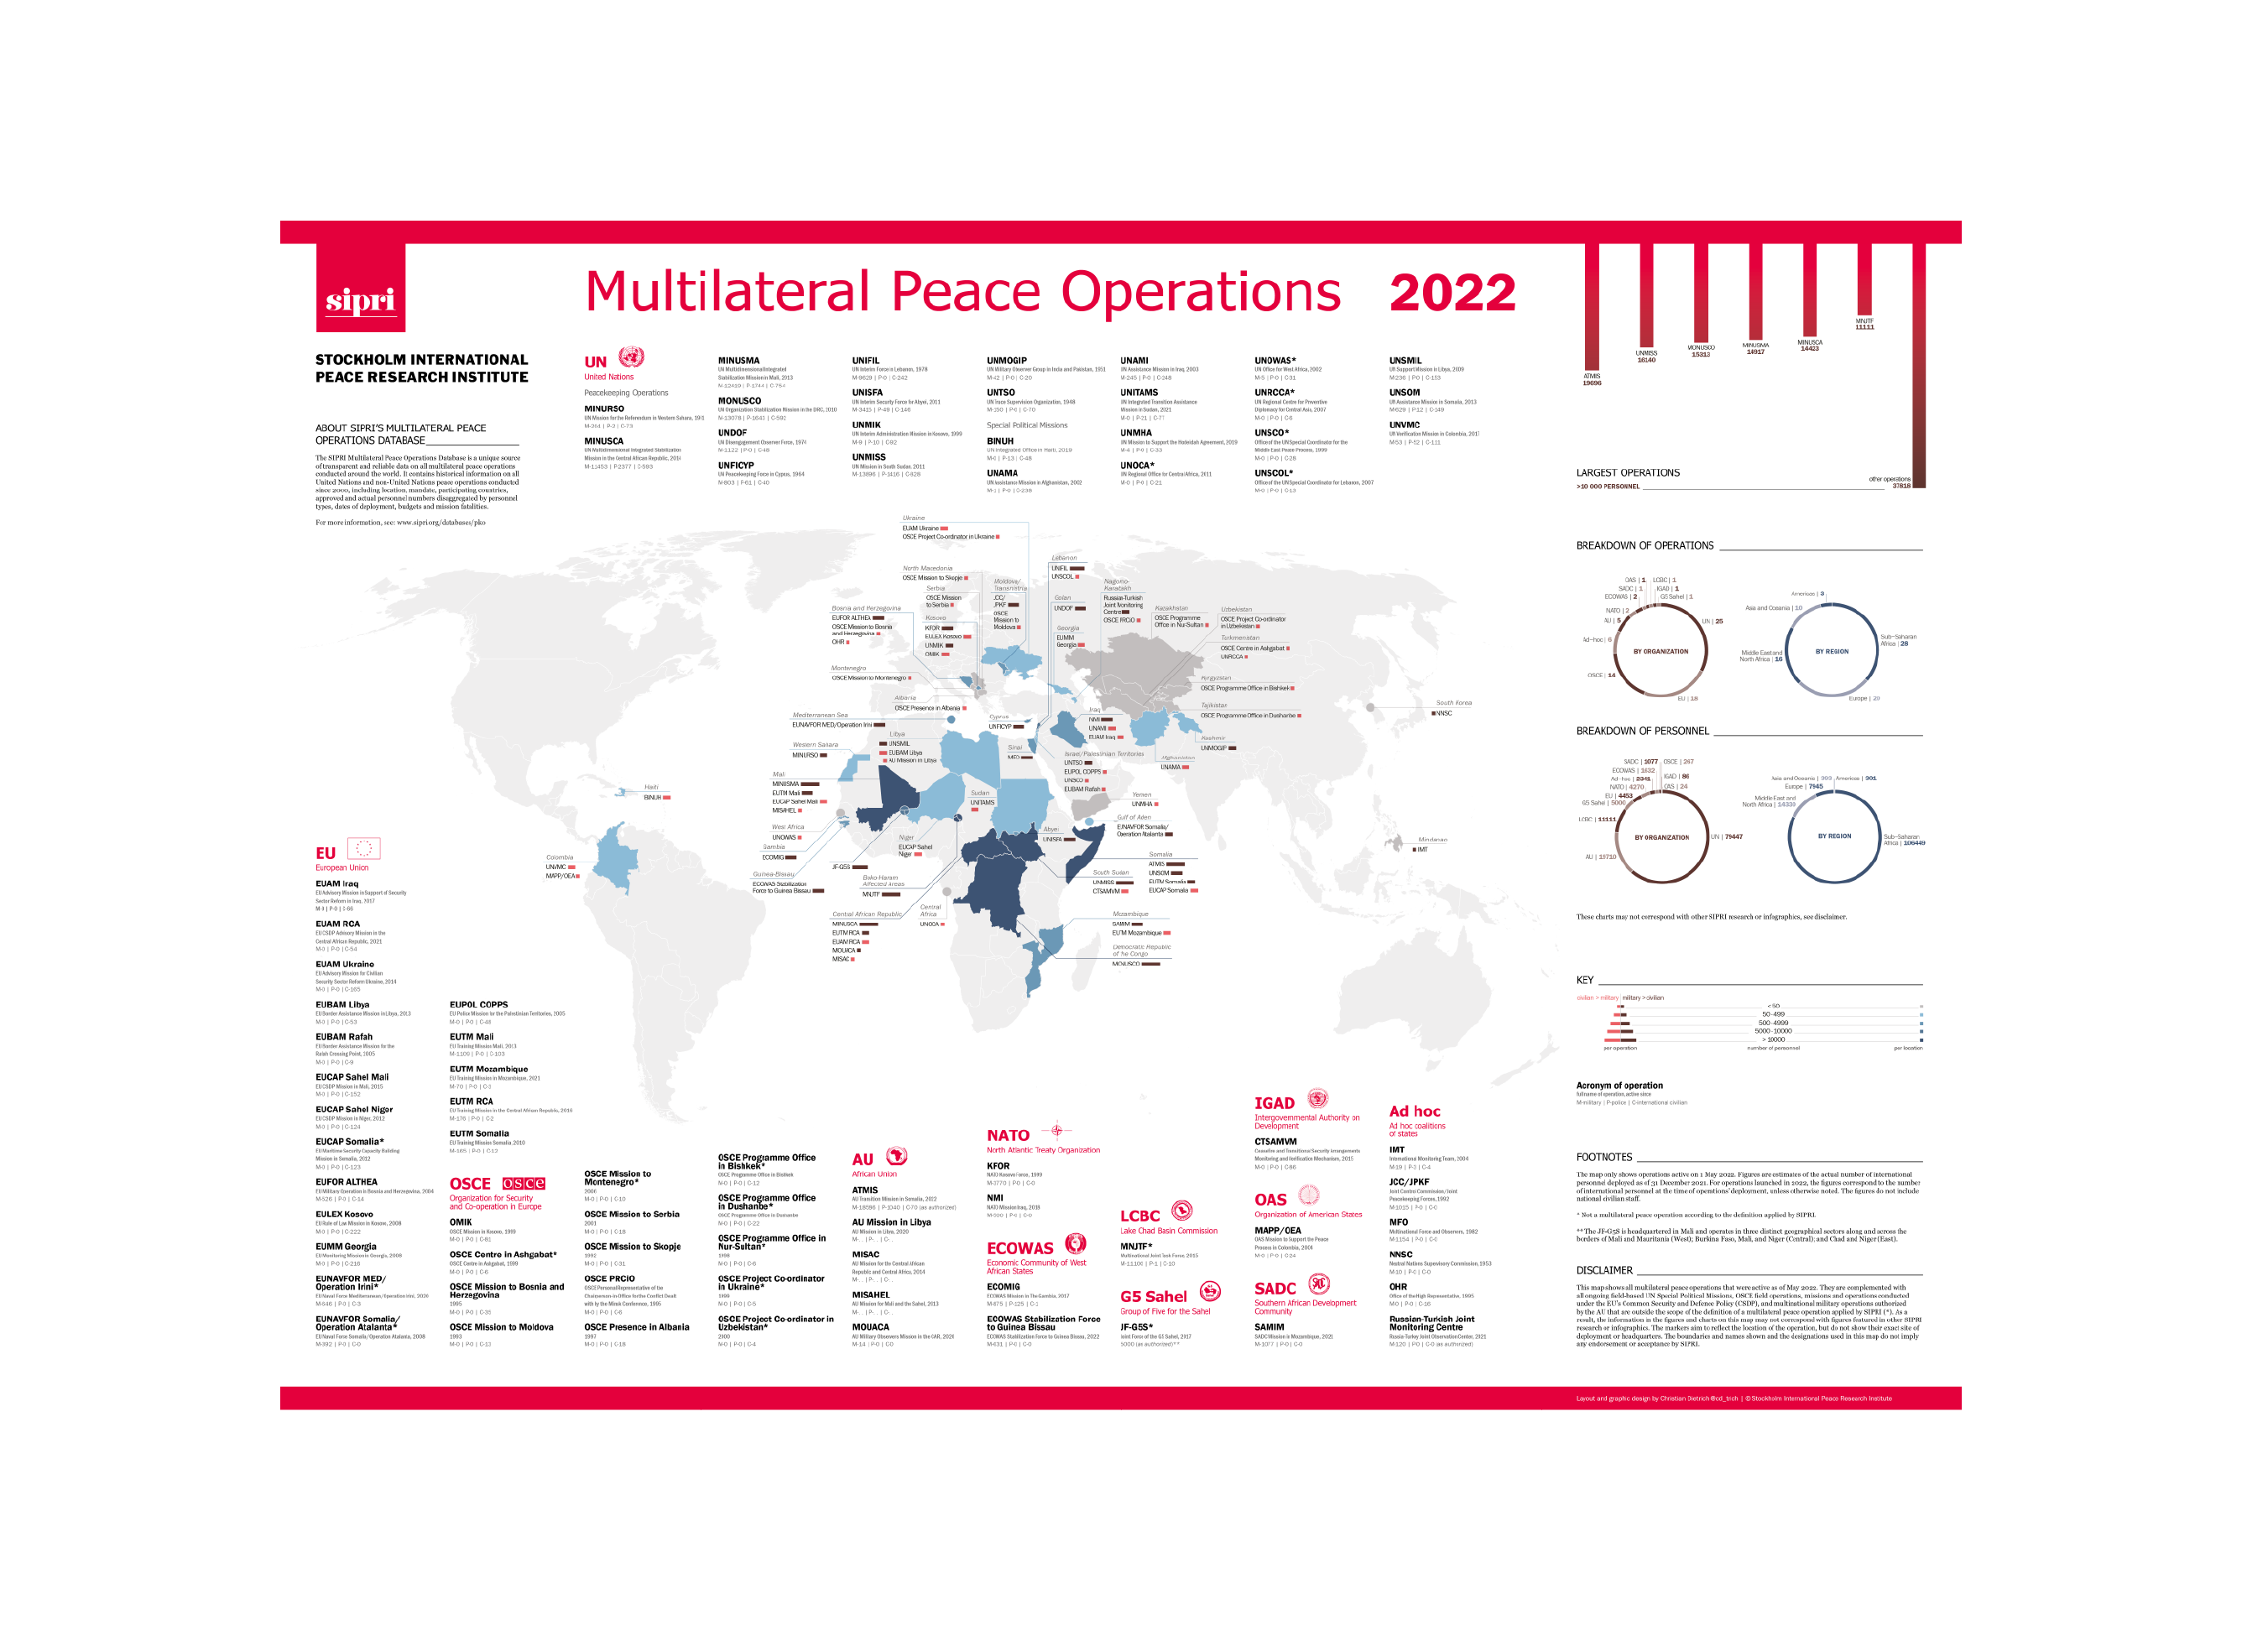 Multilateral peace operations in 2021: Developments and trends